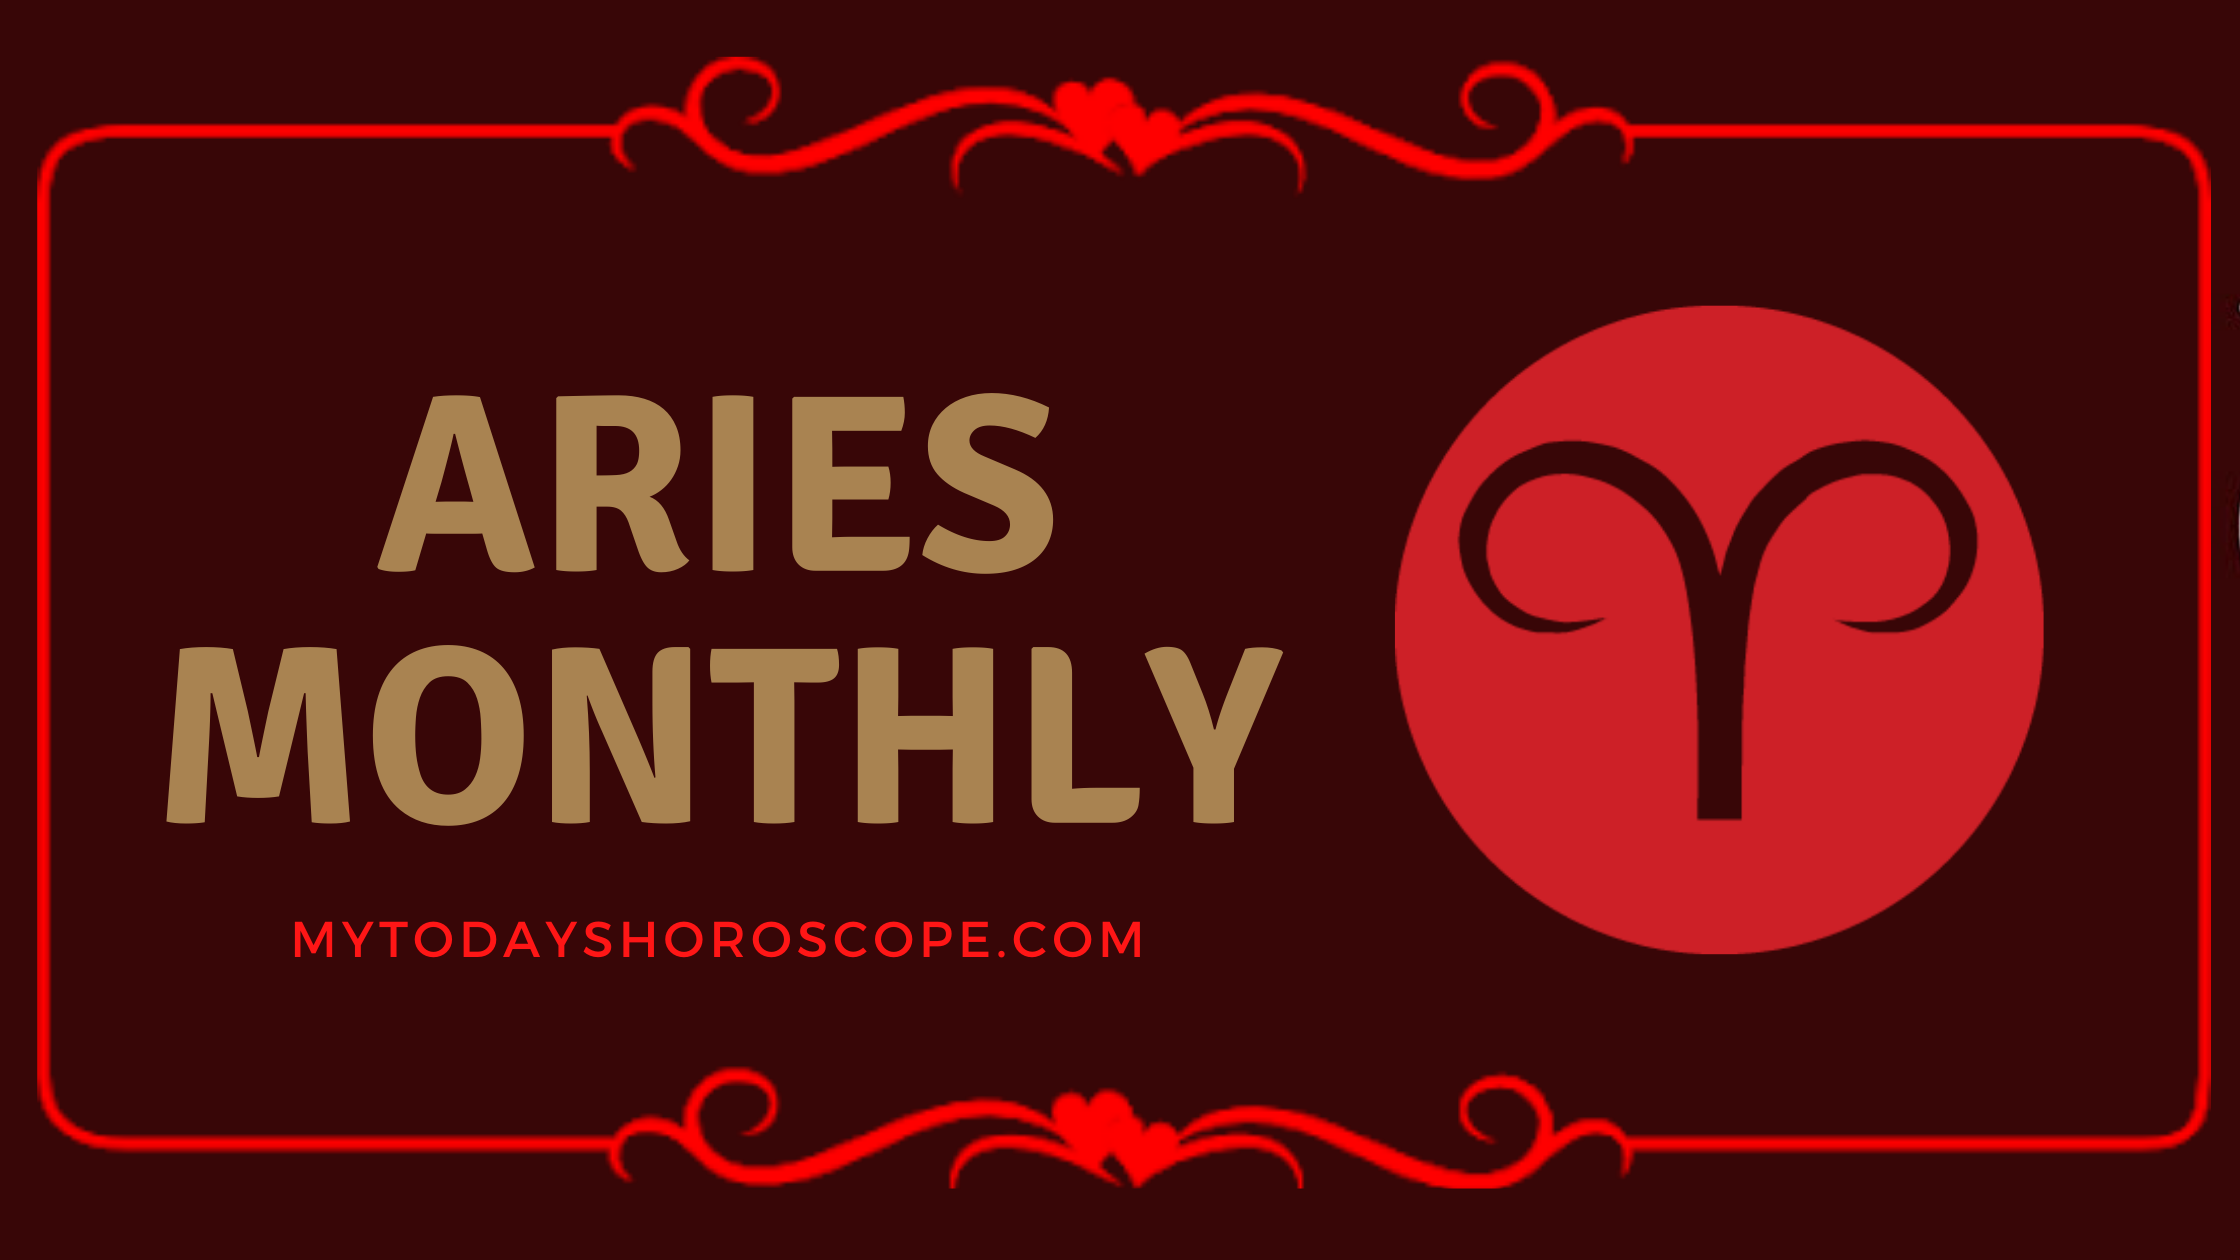 Aries Monthly Love, Work and Well Being Horoscope